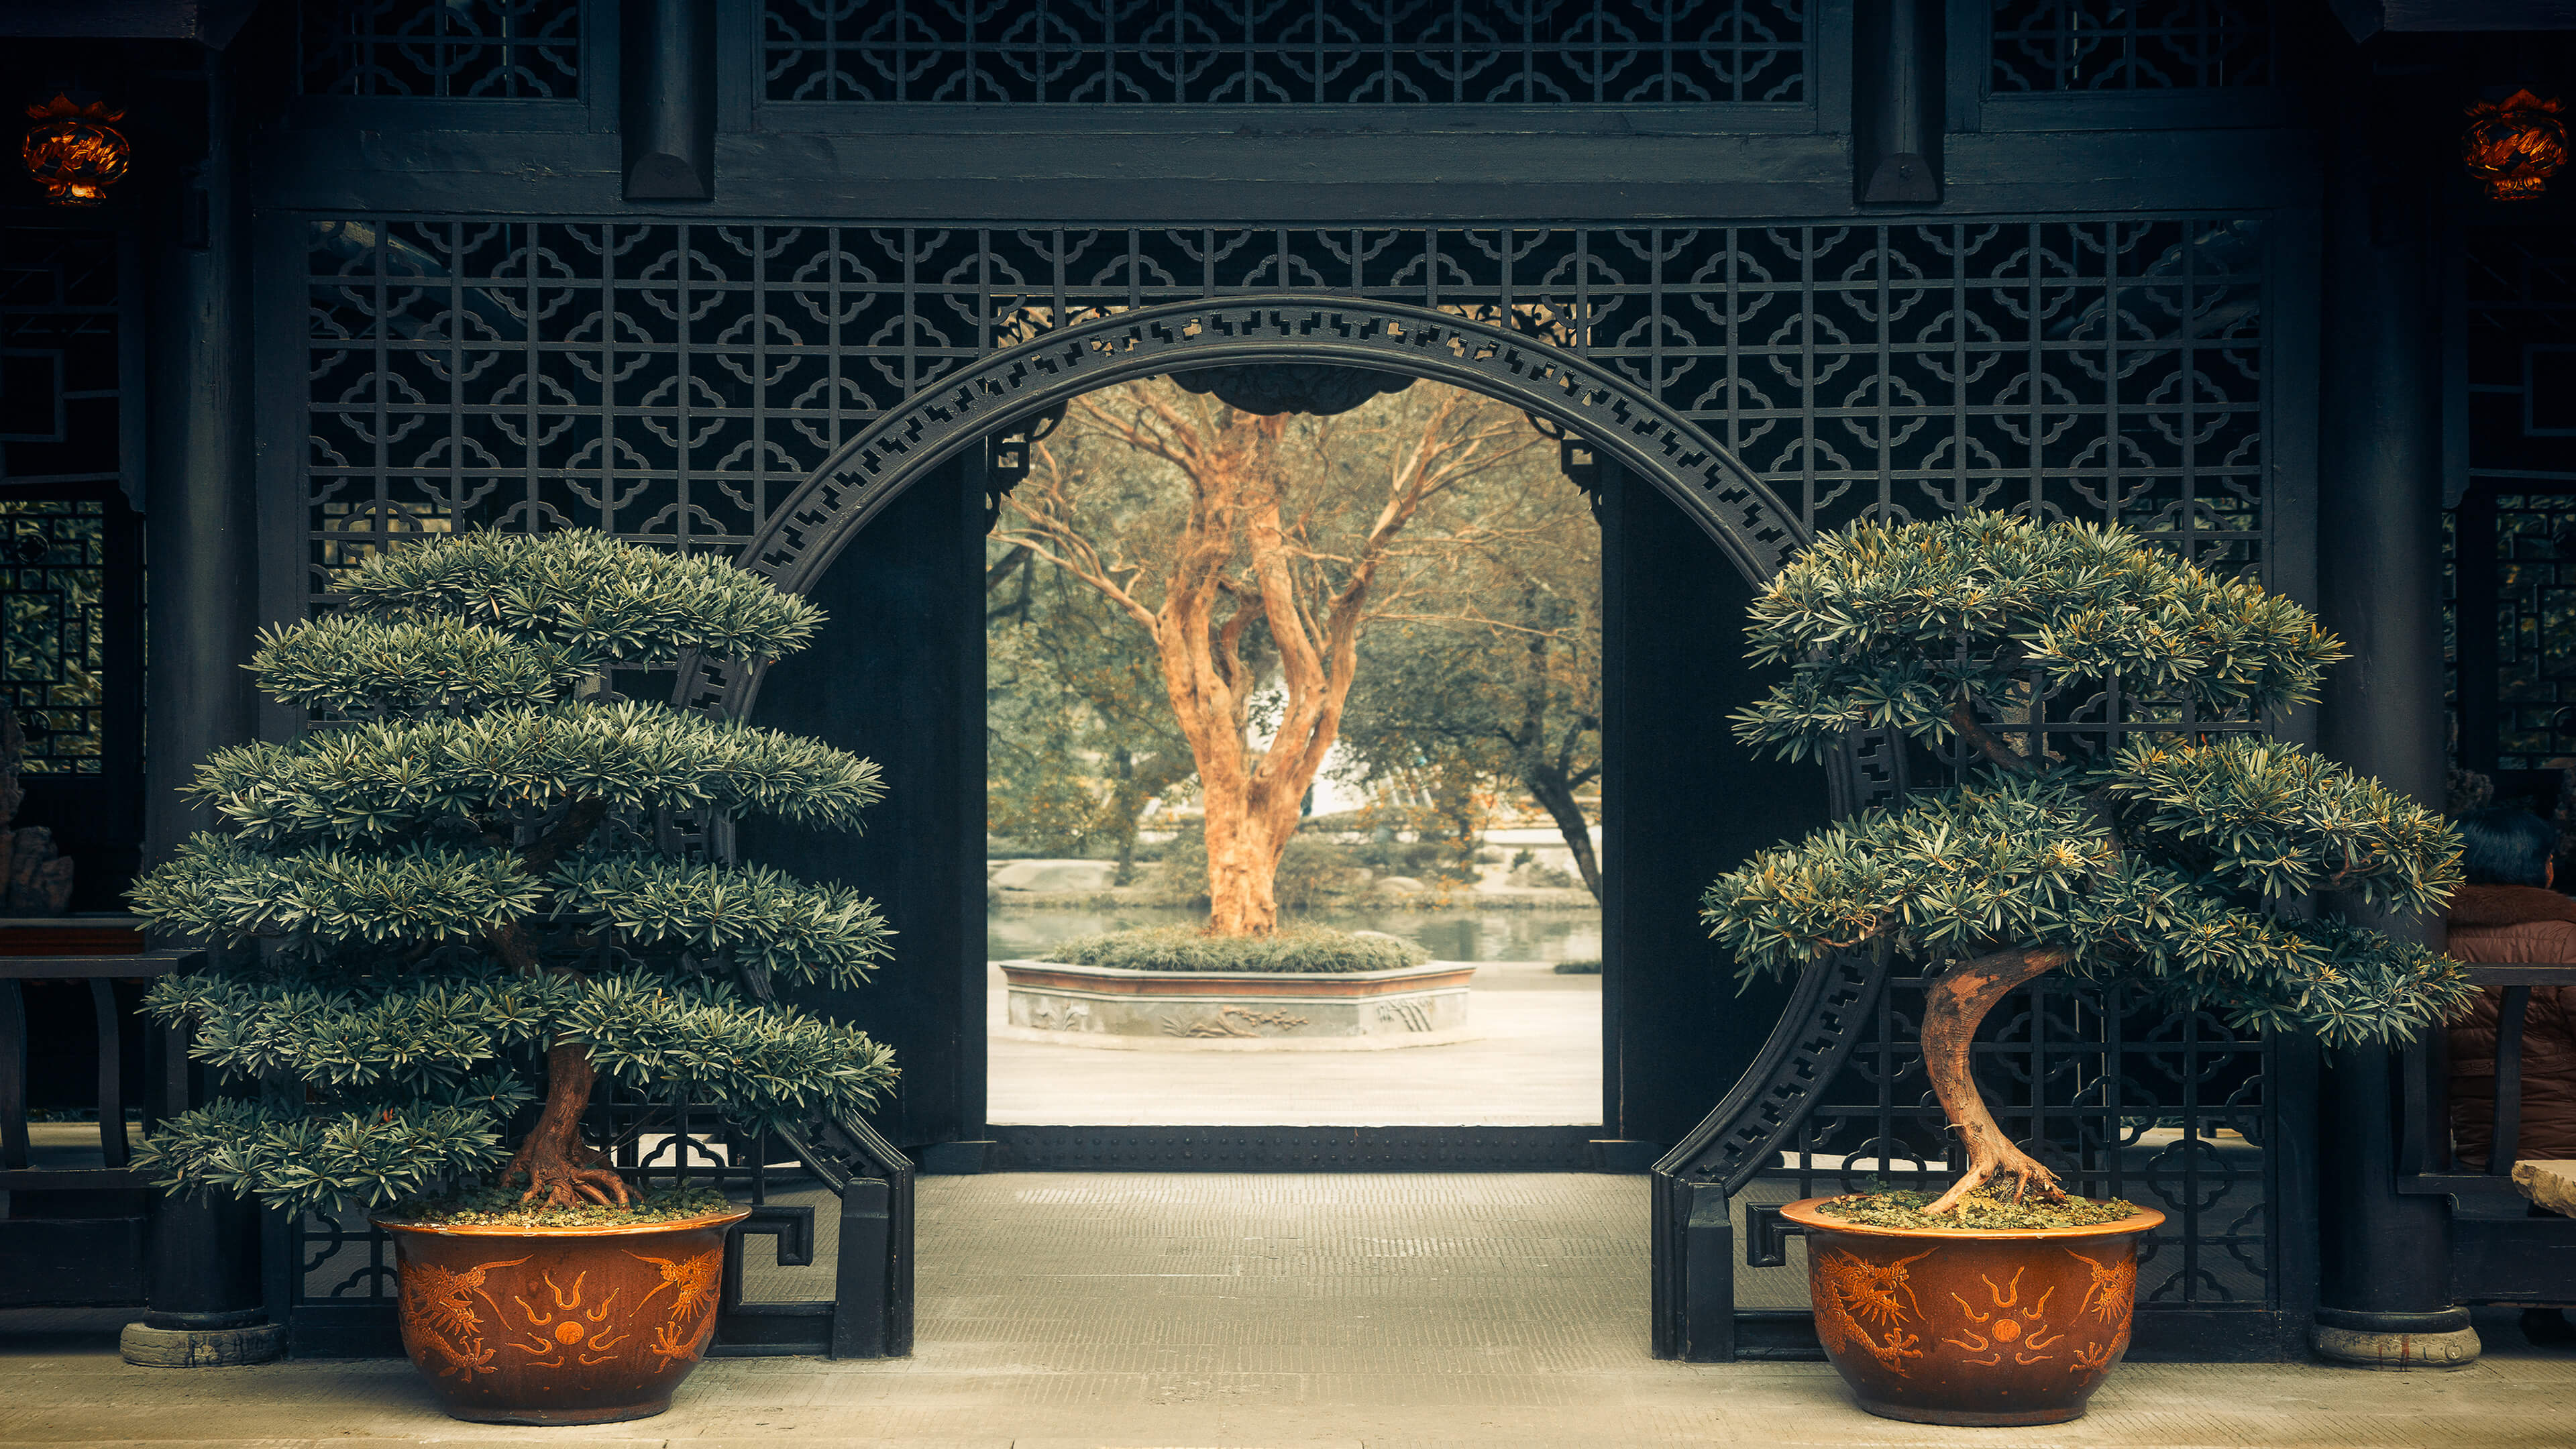 General 3840x2160 China plants trees bonsai Asian architecture symmetry peaceful doorways nature architecture arch green geometric figures pattern